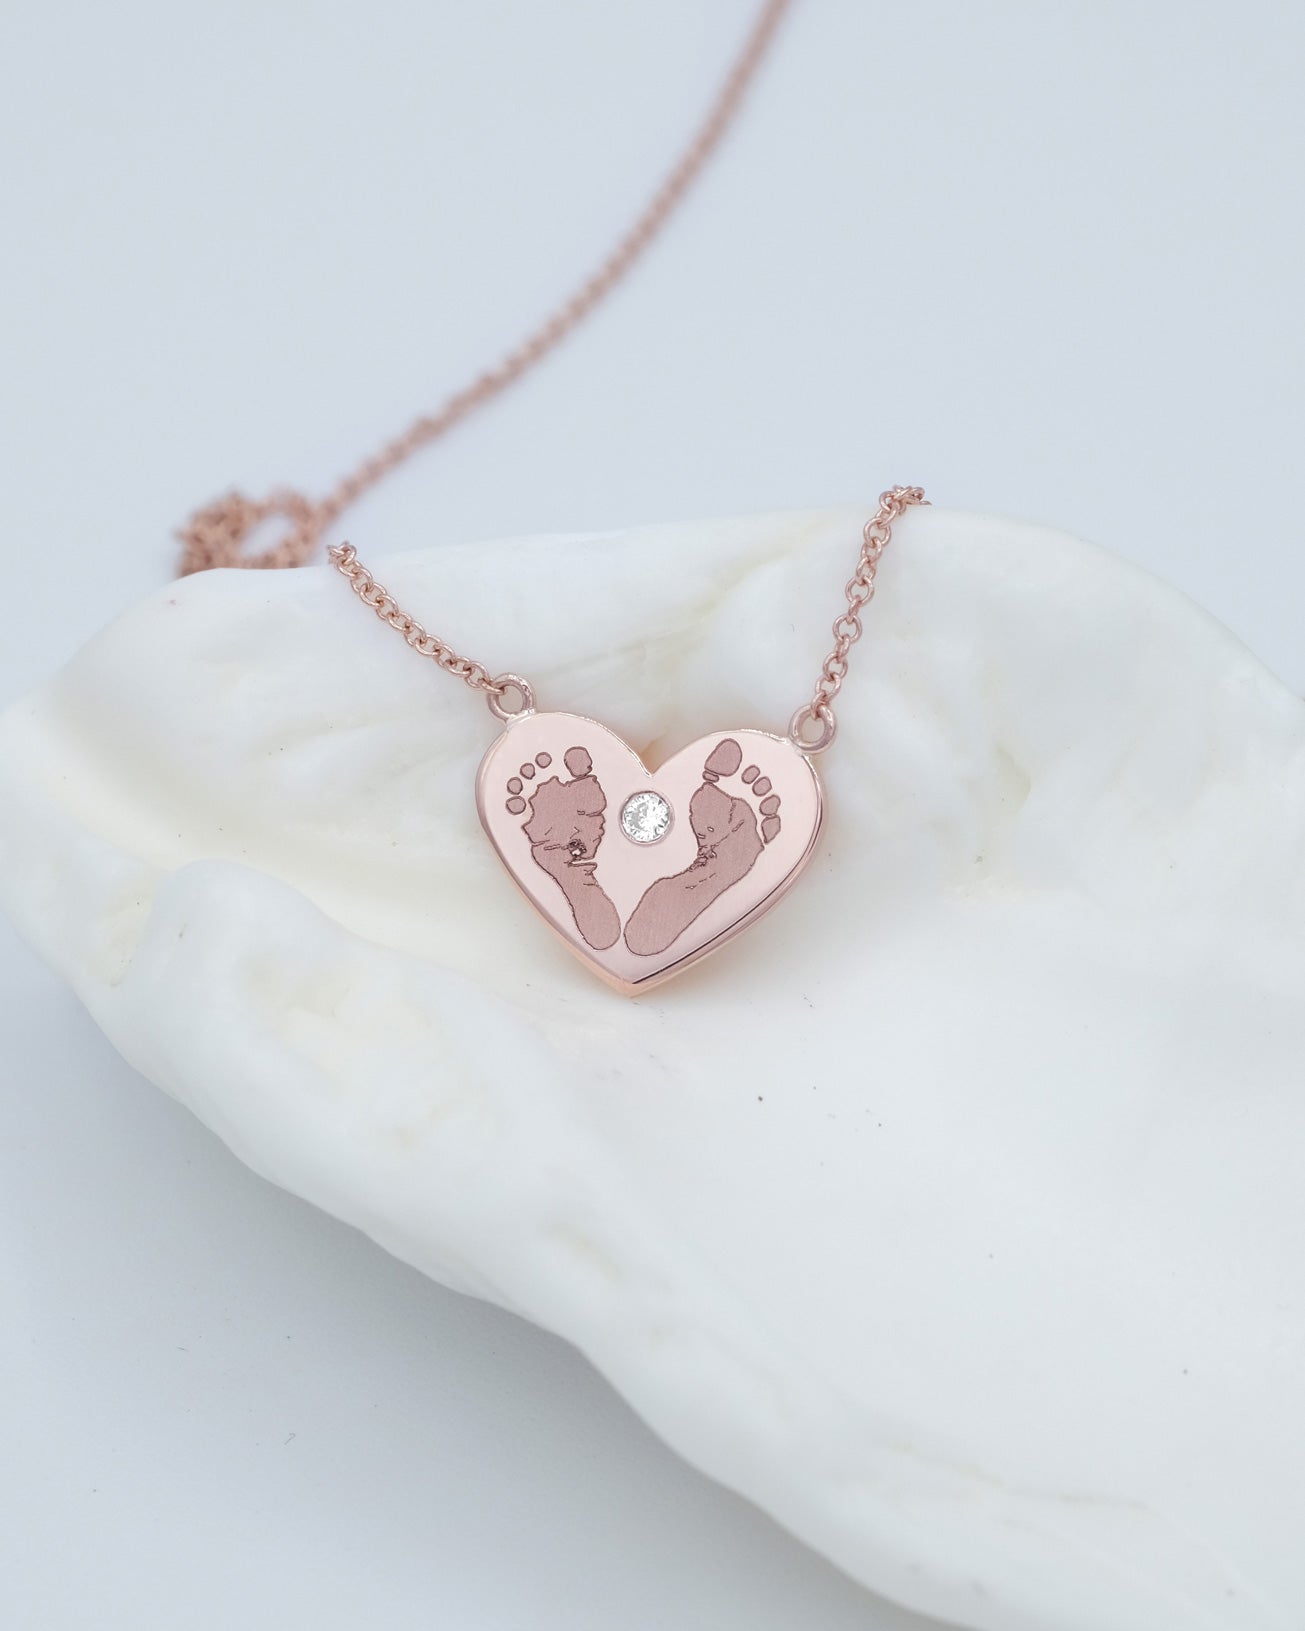 Footprints Heart Necklace with a Diamond